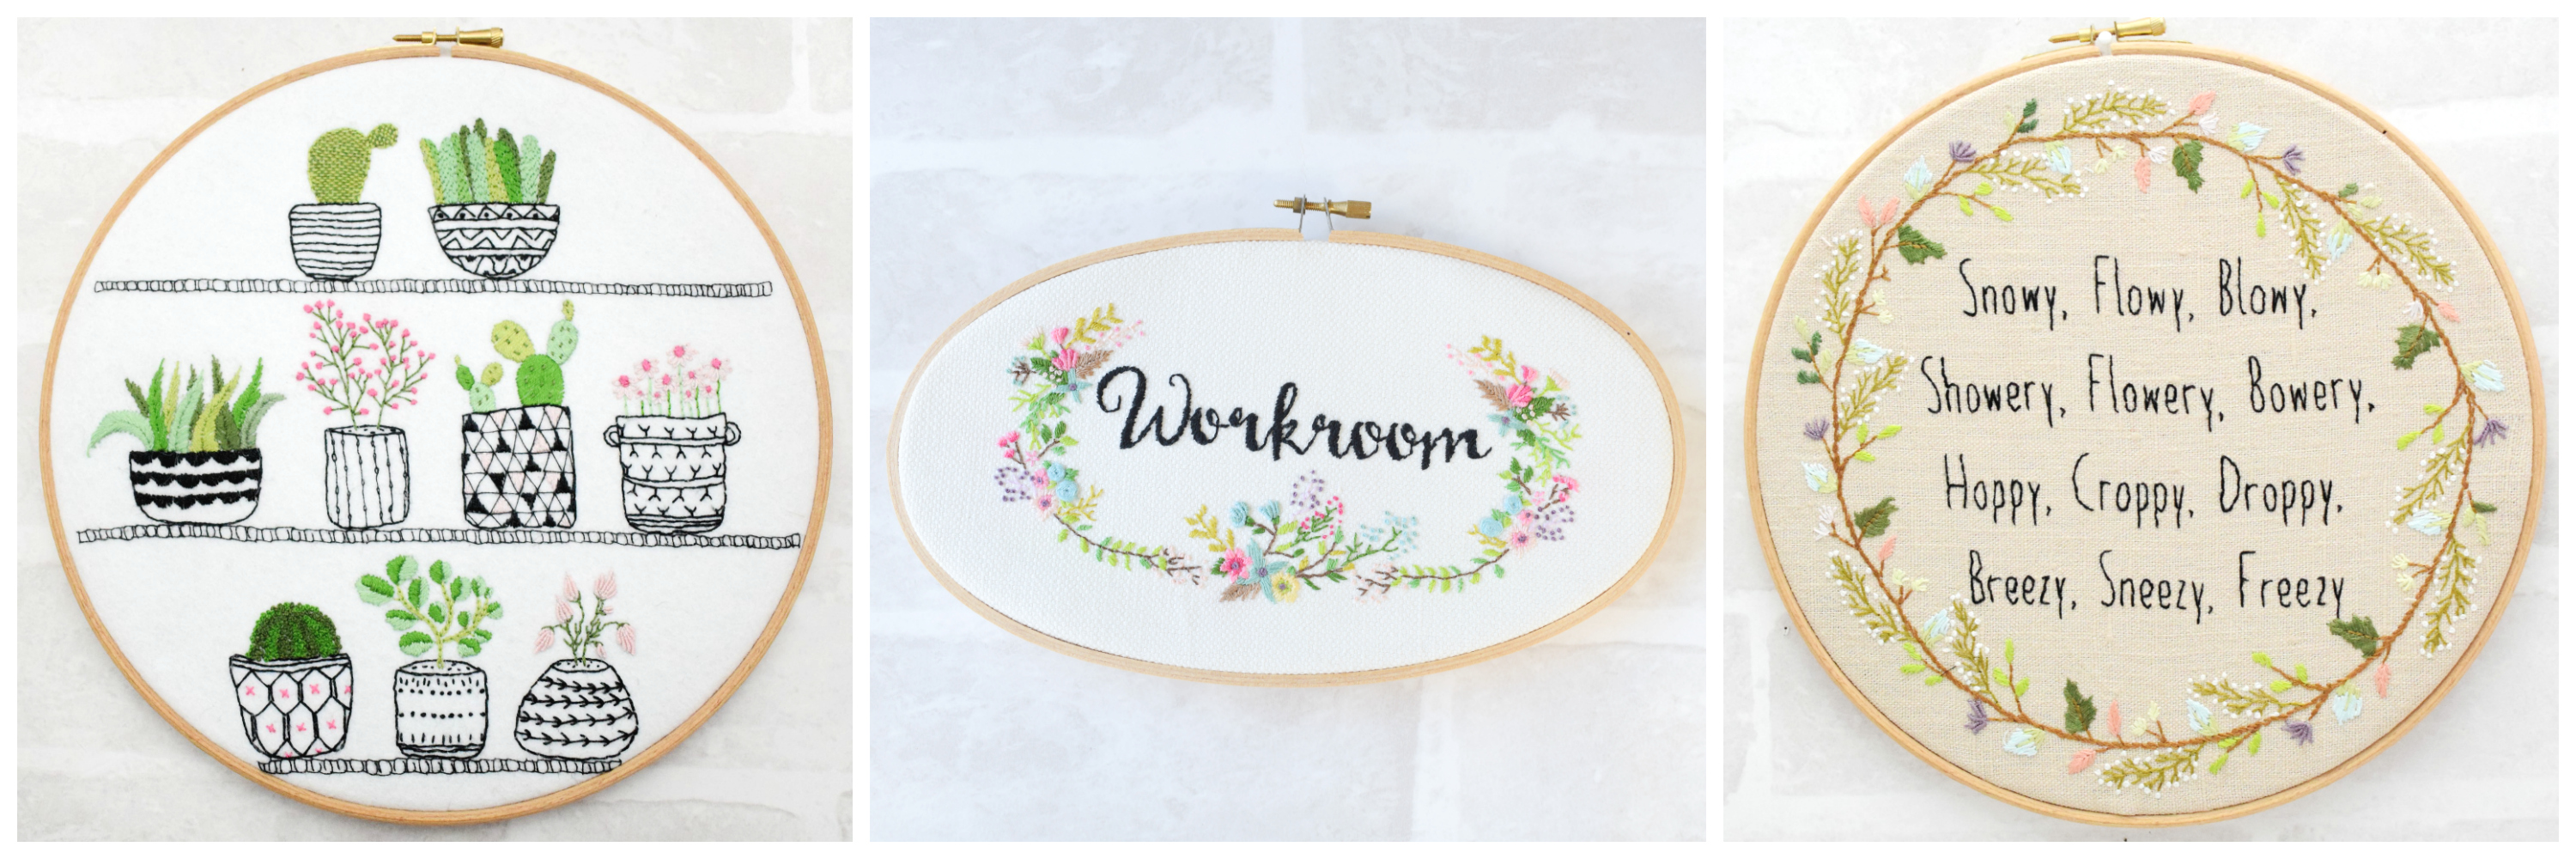 Embroidery from Bustle & Sew